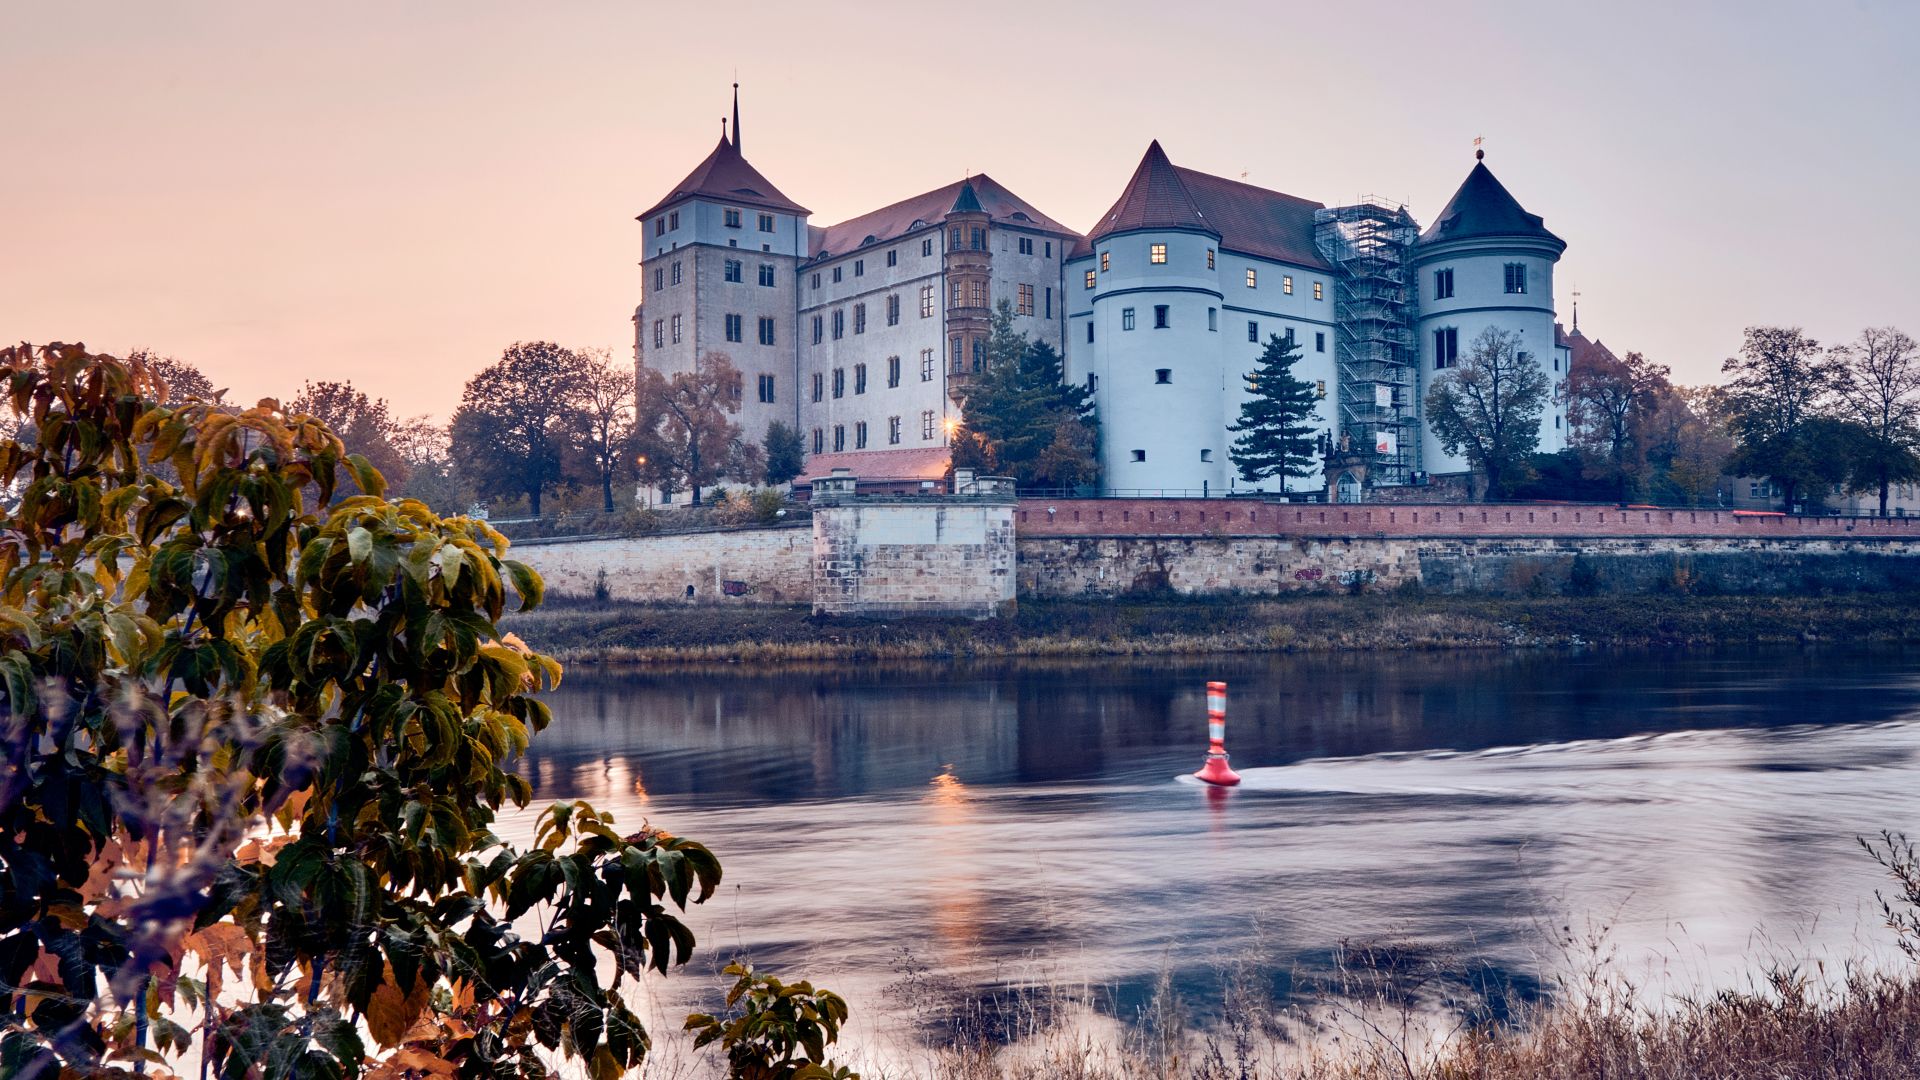 Torgau: Hartenfels Castle on the banks of the Elbe at sunset